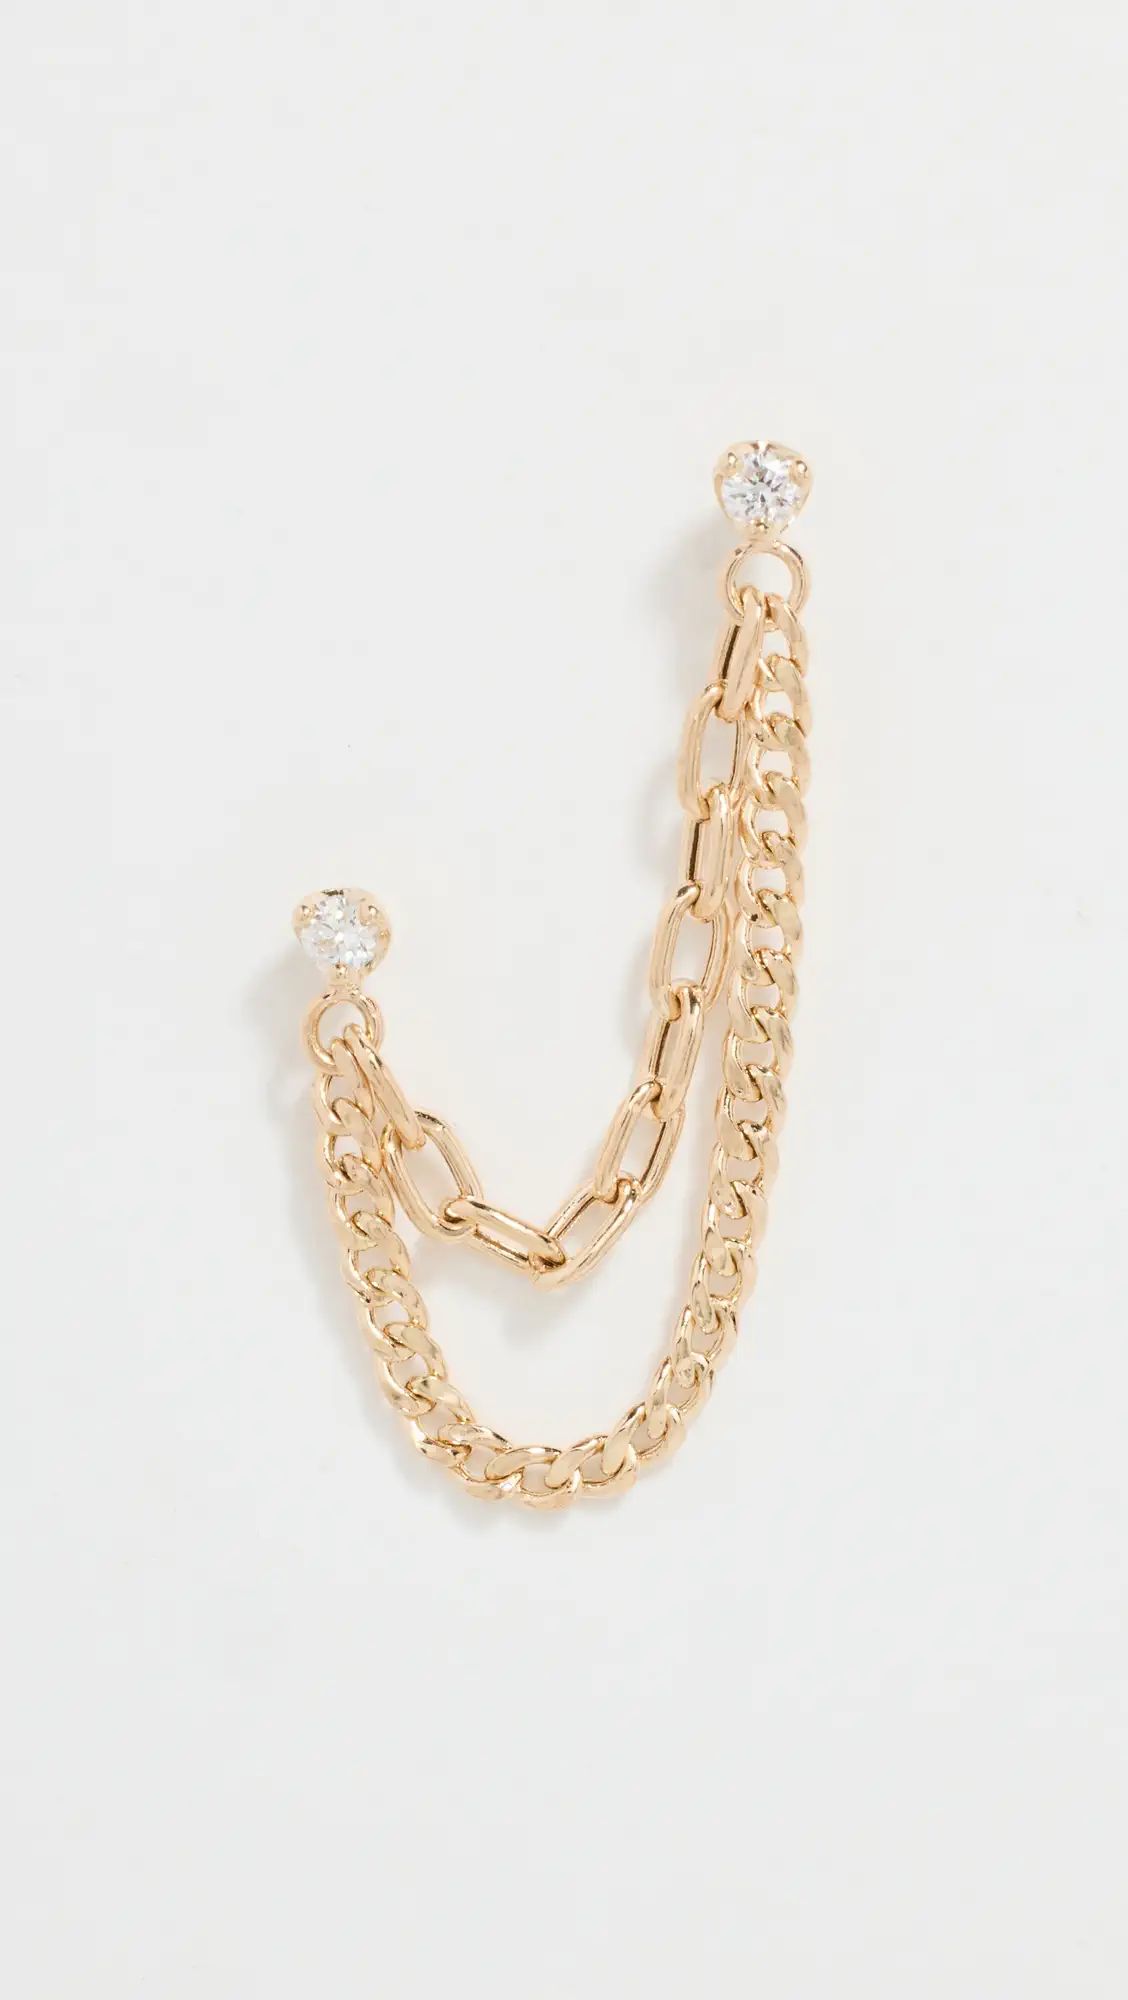 Zoe Chicco 14k 2mm Diamonds with 2 Hanging Chains Earring | Shopbop | Shopbop